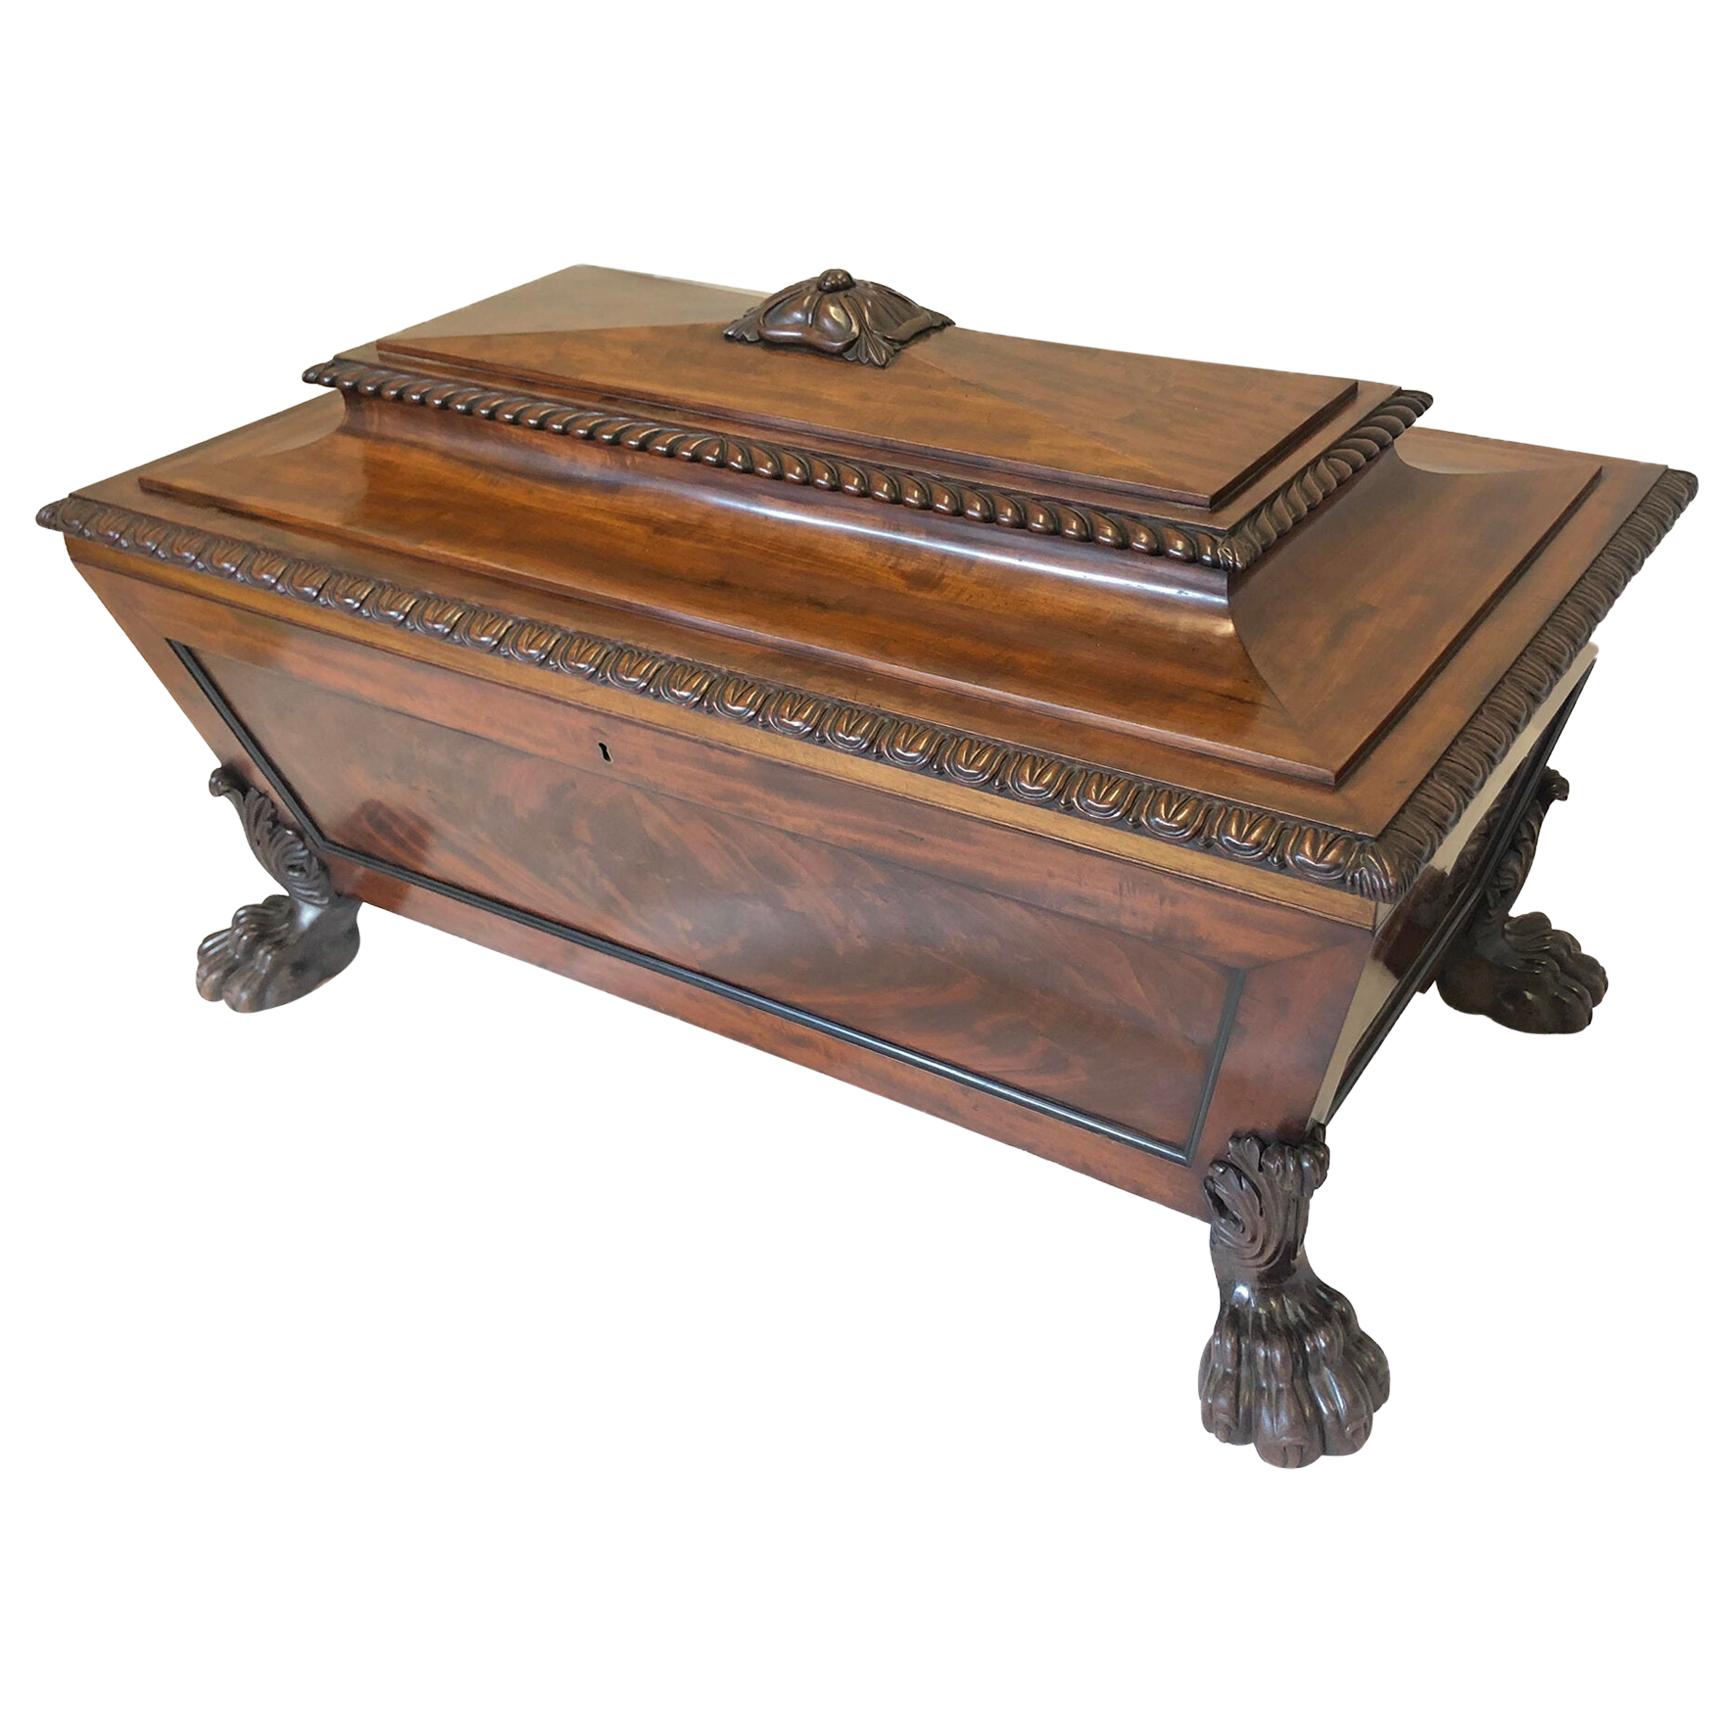 Extremely Fine Mahogany Sarcophagus Cellarette For Sale